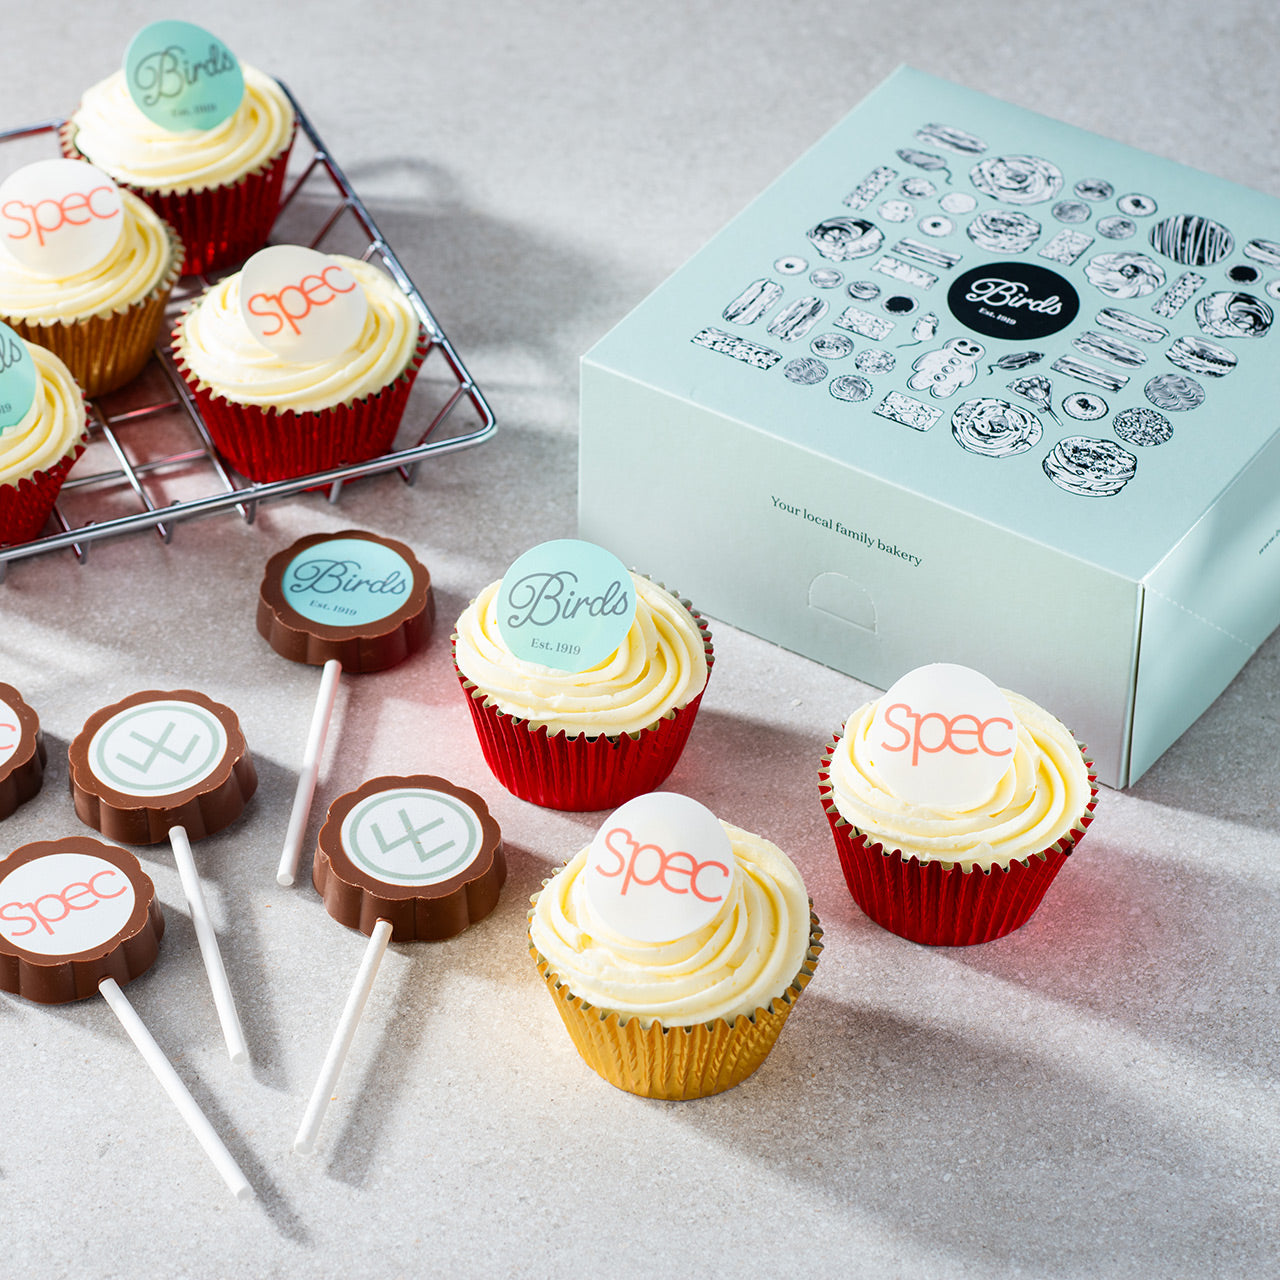 A selection of chocolate lollypops and cupcakes with brand logos